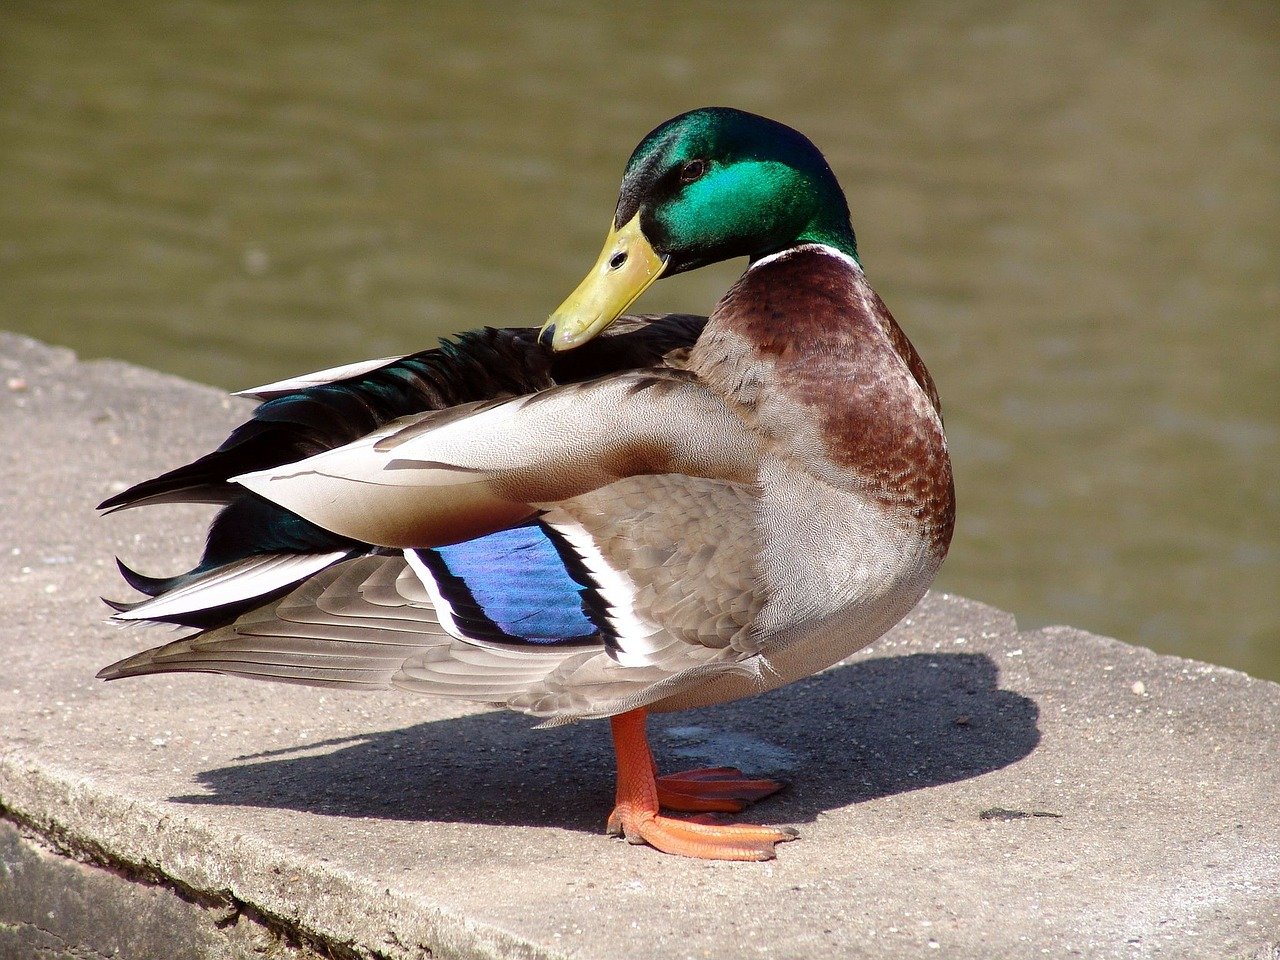 A wild duck standing next to a river on a concrete wall. I Image: Pixabay.